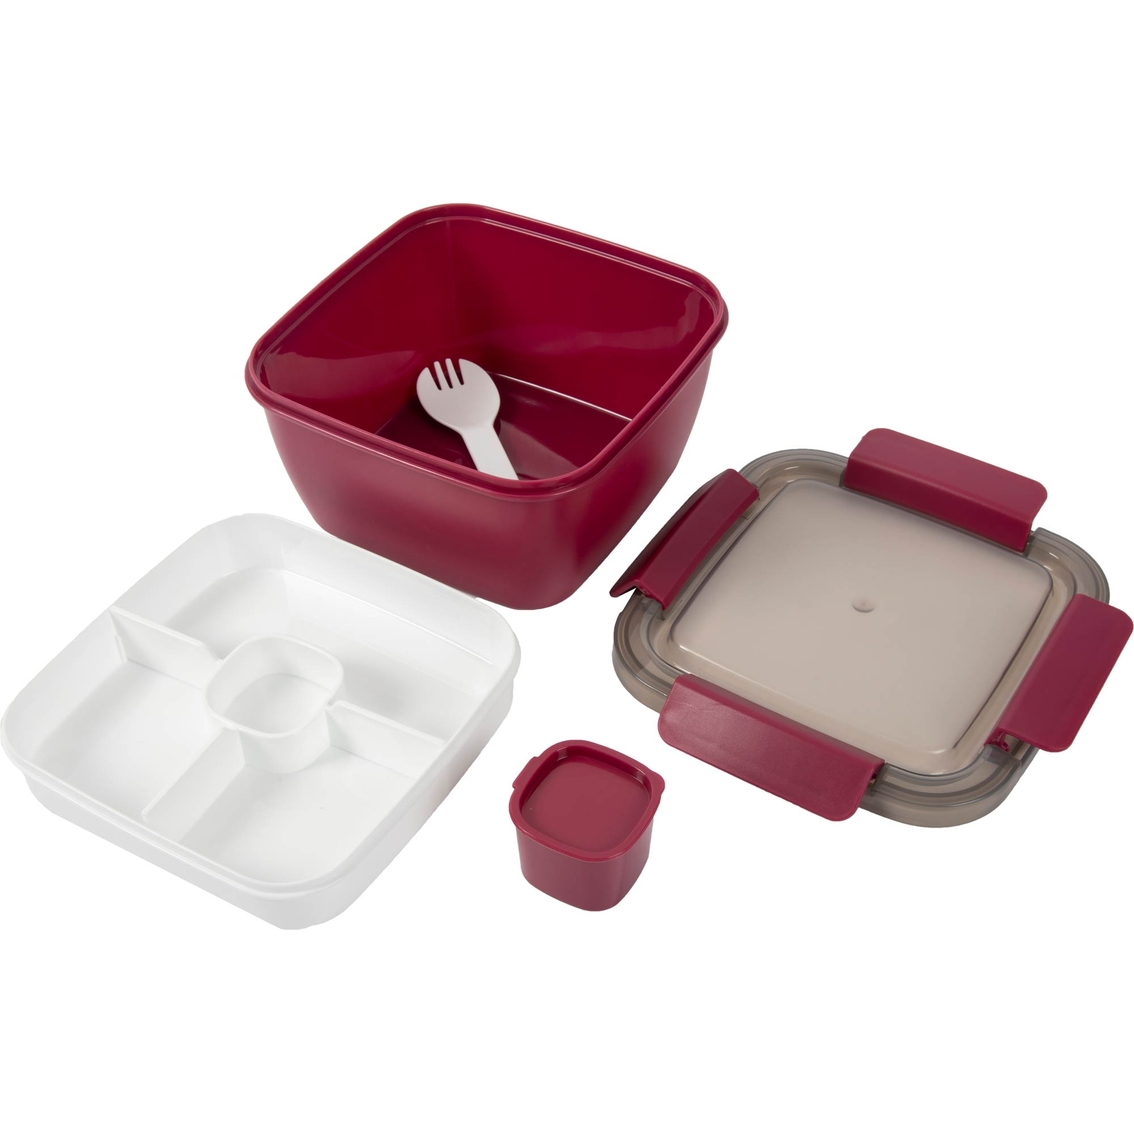 Spice by Tia Mowry Spicy Thyme 6.75 in. Lunch Kit with Spork and Locking Lid - Image 2 of 2